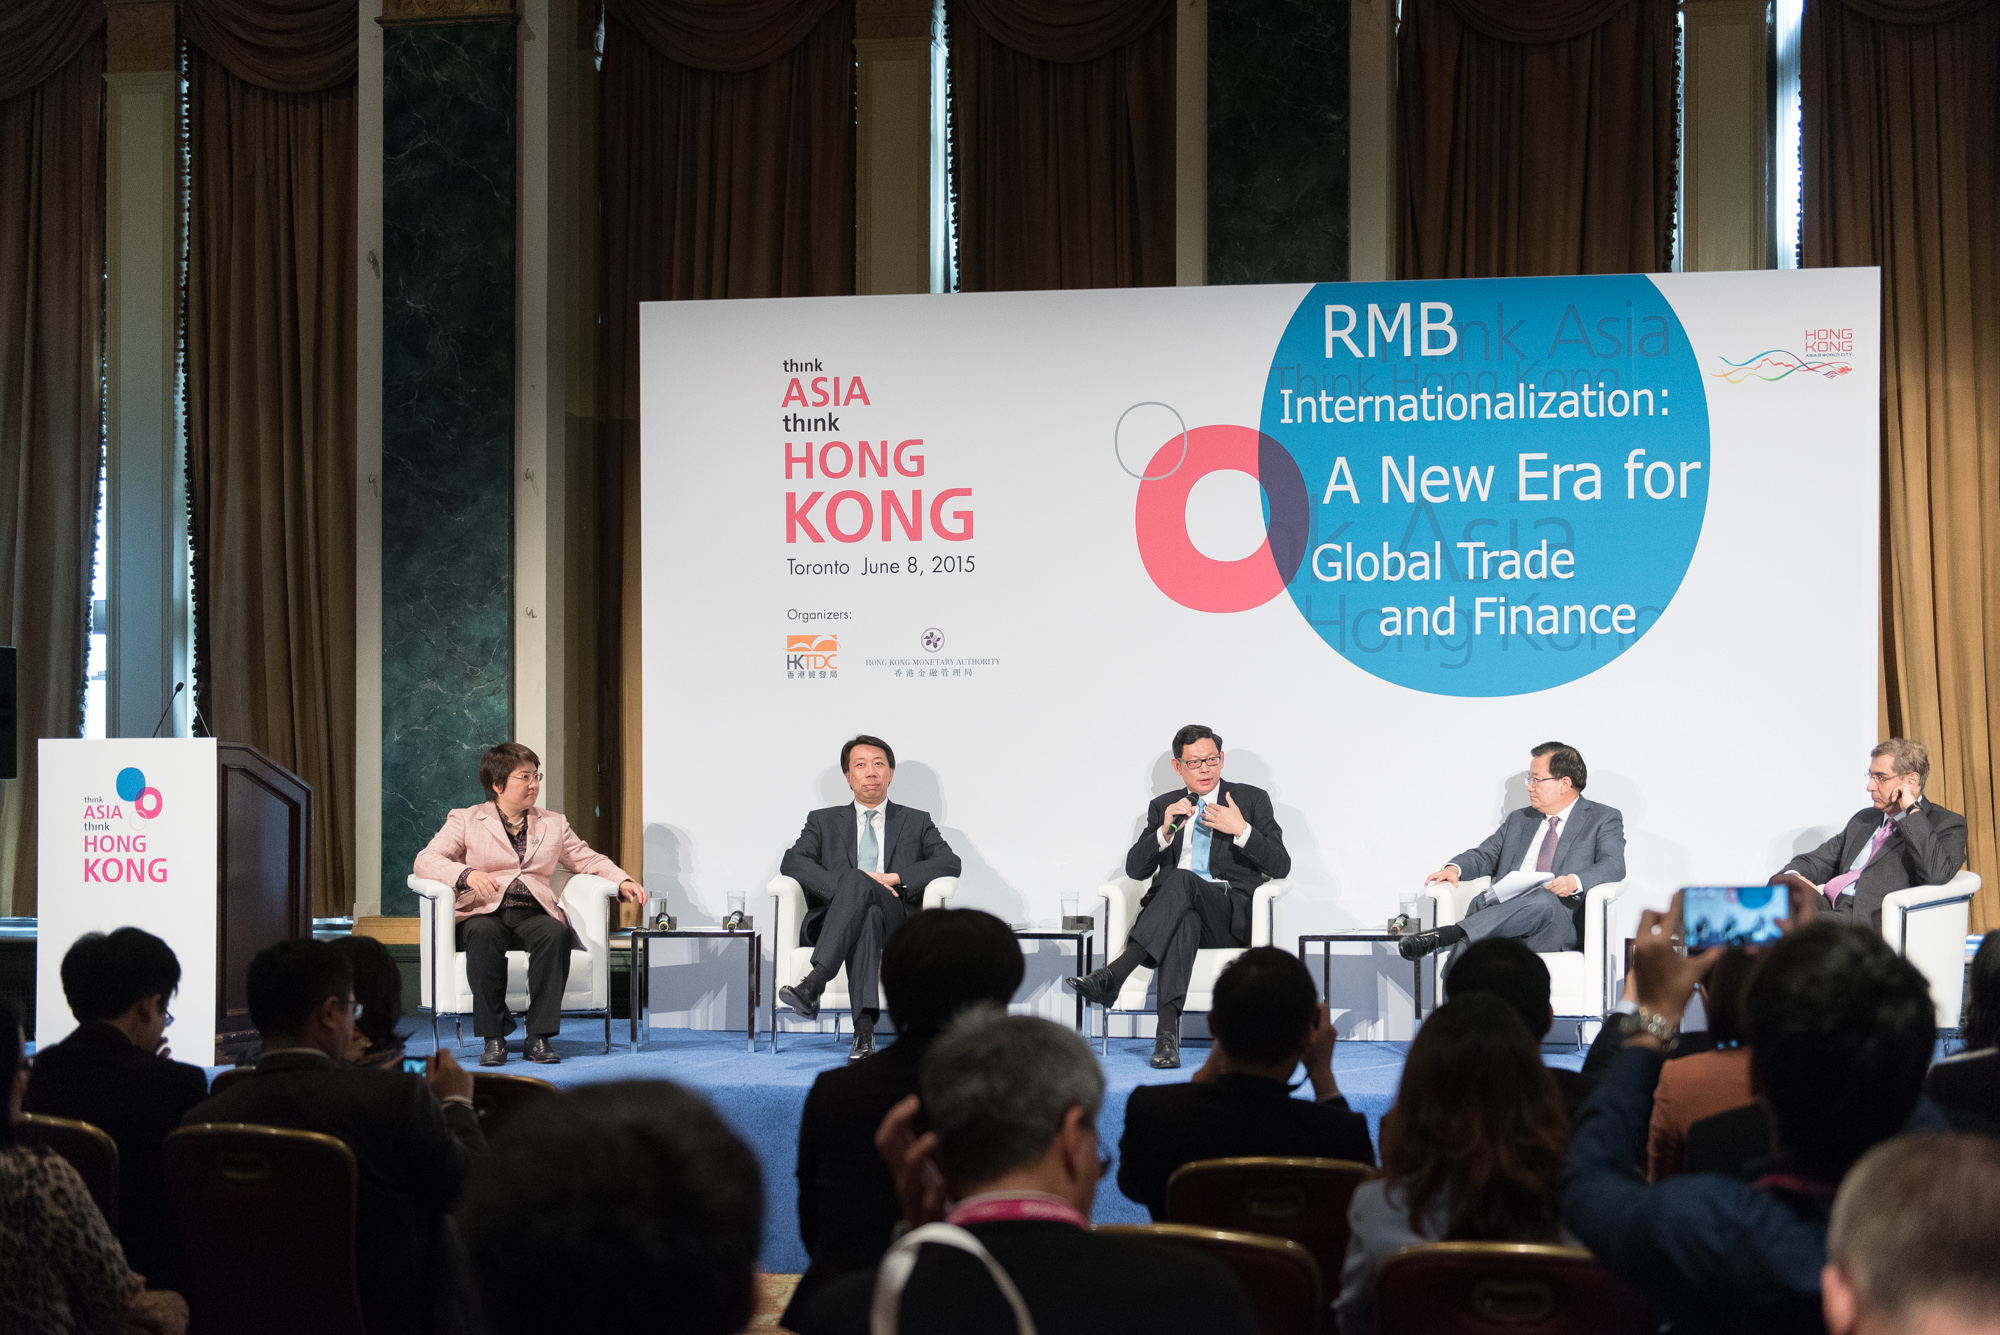 Mr Norman Chan, Chief Executive of the HKMA (middle) leads the panel discussion at the seminar. Panel members include (from left to right): Ms Ding Chen, Chief Executive Officer, CSOP Asset Management Limited; Mr Benjamin Hung, Regional Chief Executive Officer, Greater China, Standard Chartered Bank (Hong Kong) Limited; Mr Gao Yingxin, Executive Vice President, Bank of China; and Mr Romnesh Lamba, Co-Head of Global Markets, Hong Kong Exchanges and Clearing Limited.